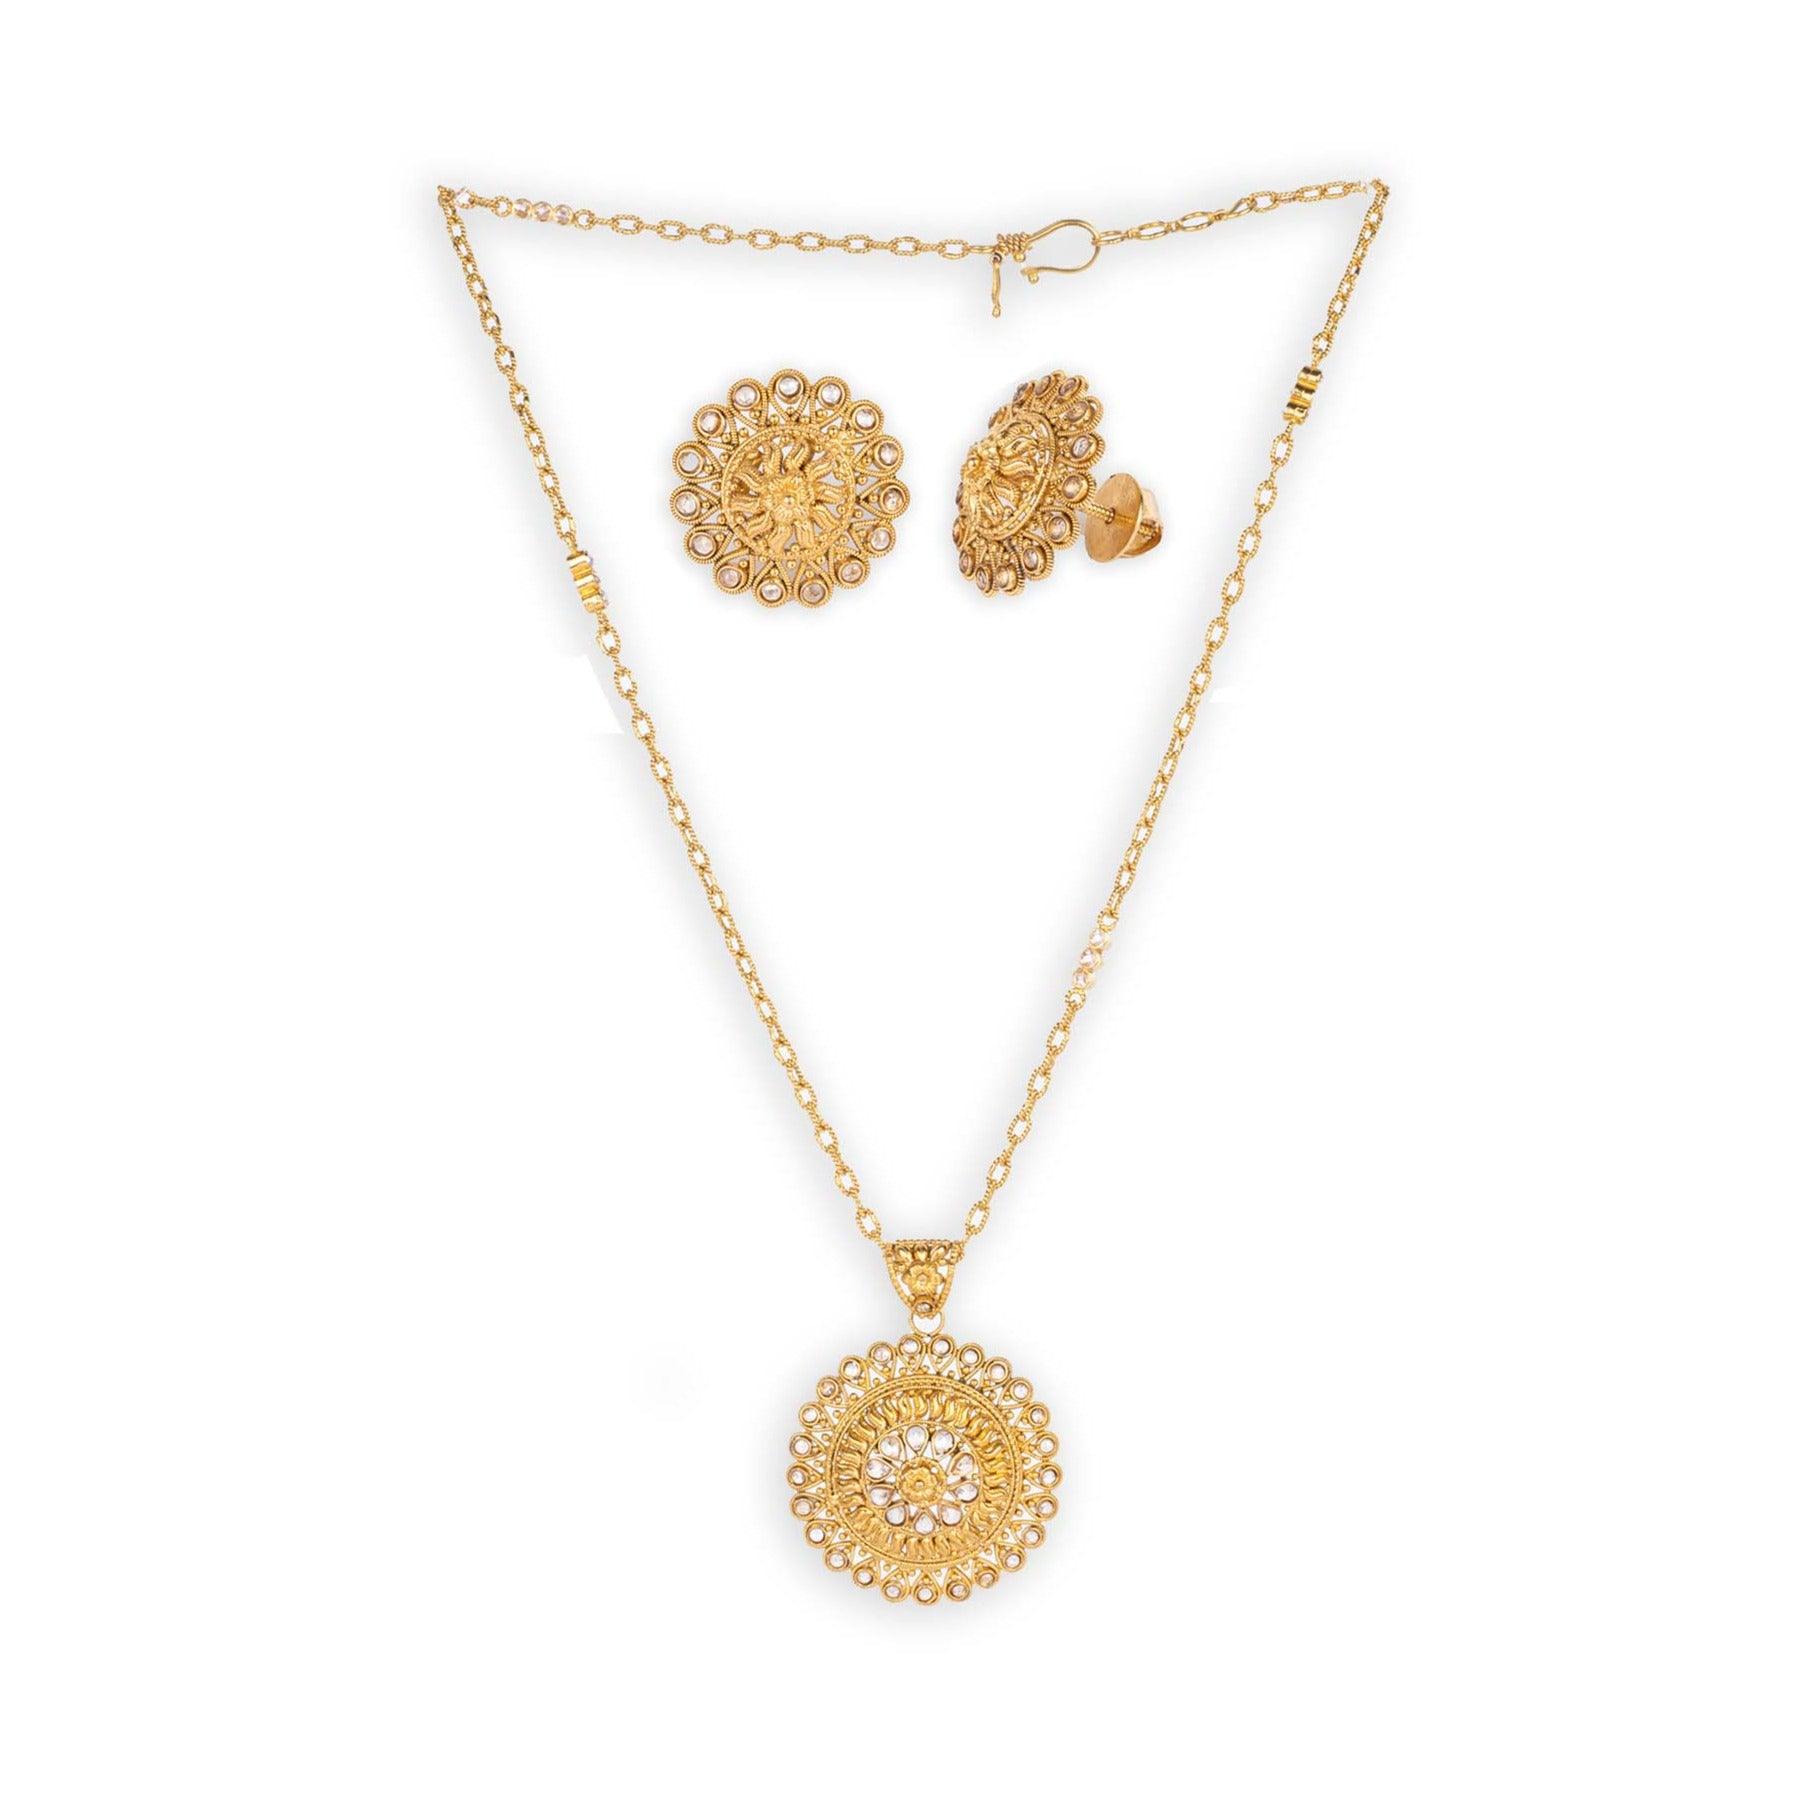 22ct Gold Antiquated Look Chain, Pendant and Earrings set with Cubic Zirconia Stones (25.2g) CH&P&E-8445